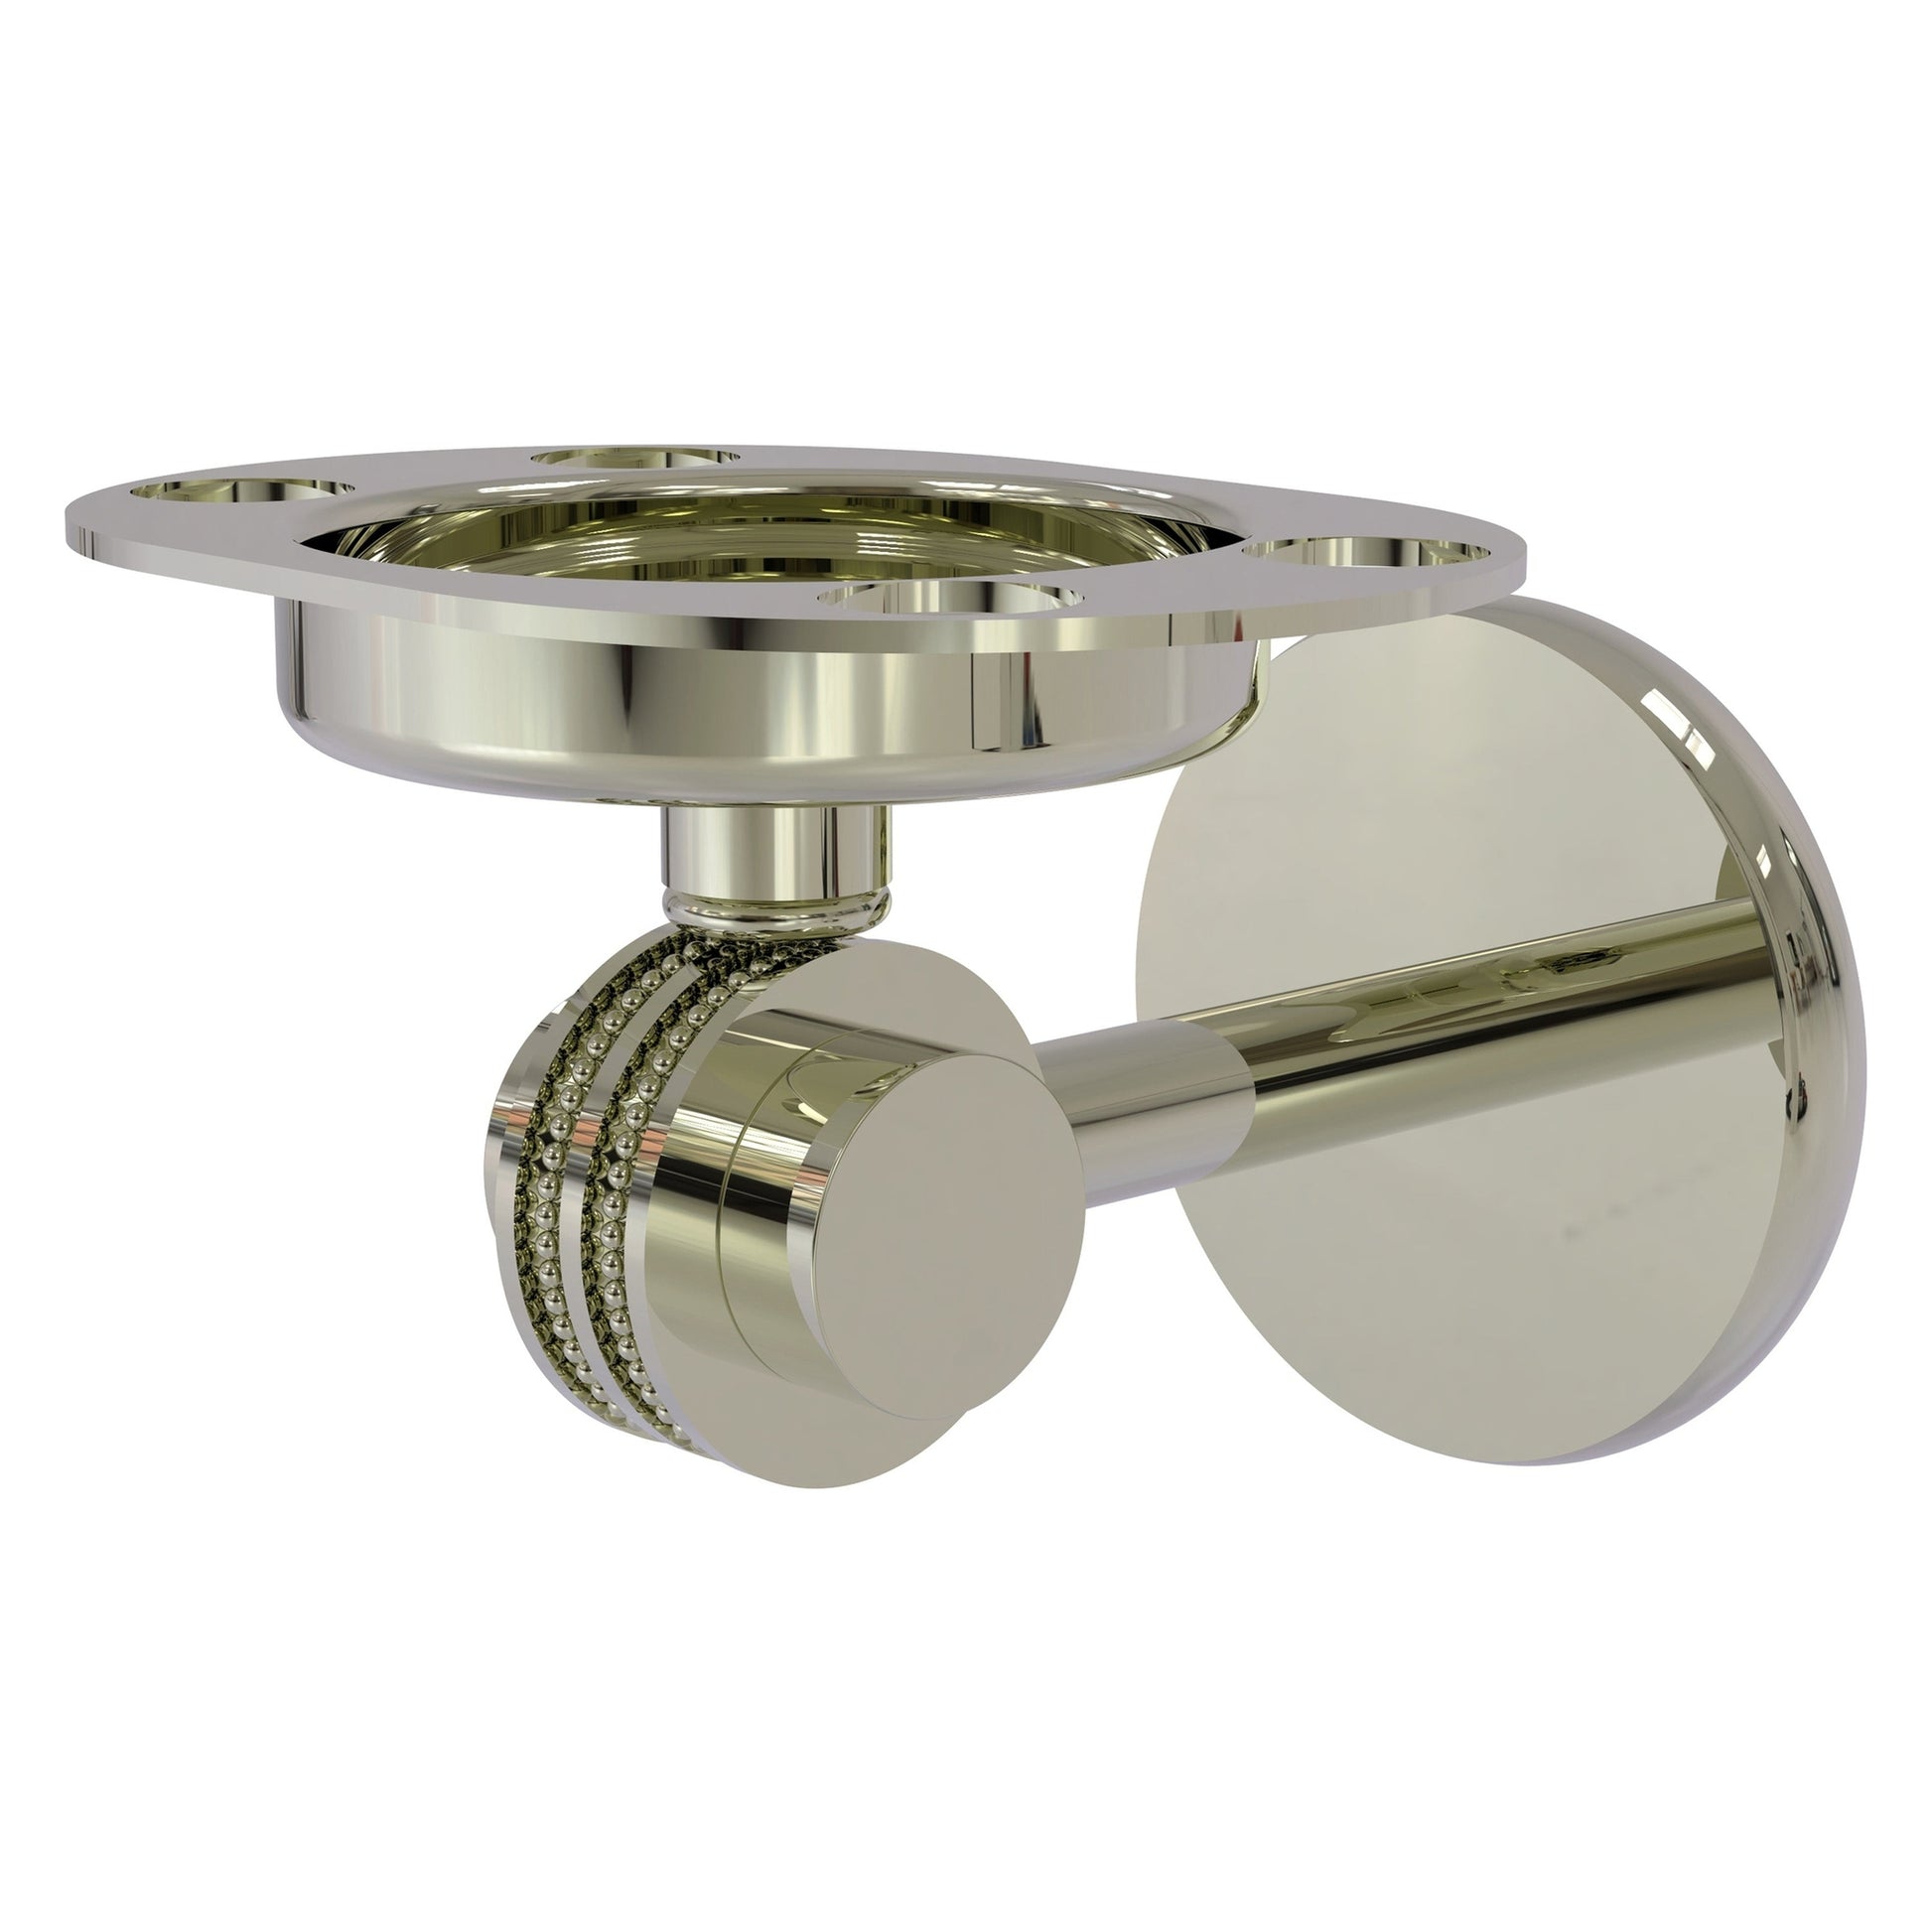 Allied Brass Satellite Orbit Two 4.5" x 3.5" Polished Nickel Solid Brass Tumbler and Toothbrush Holder With Dotted Accents